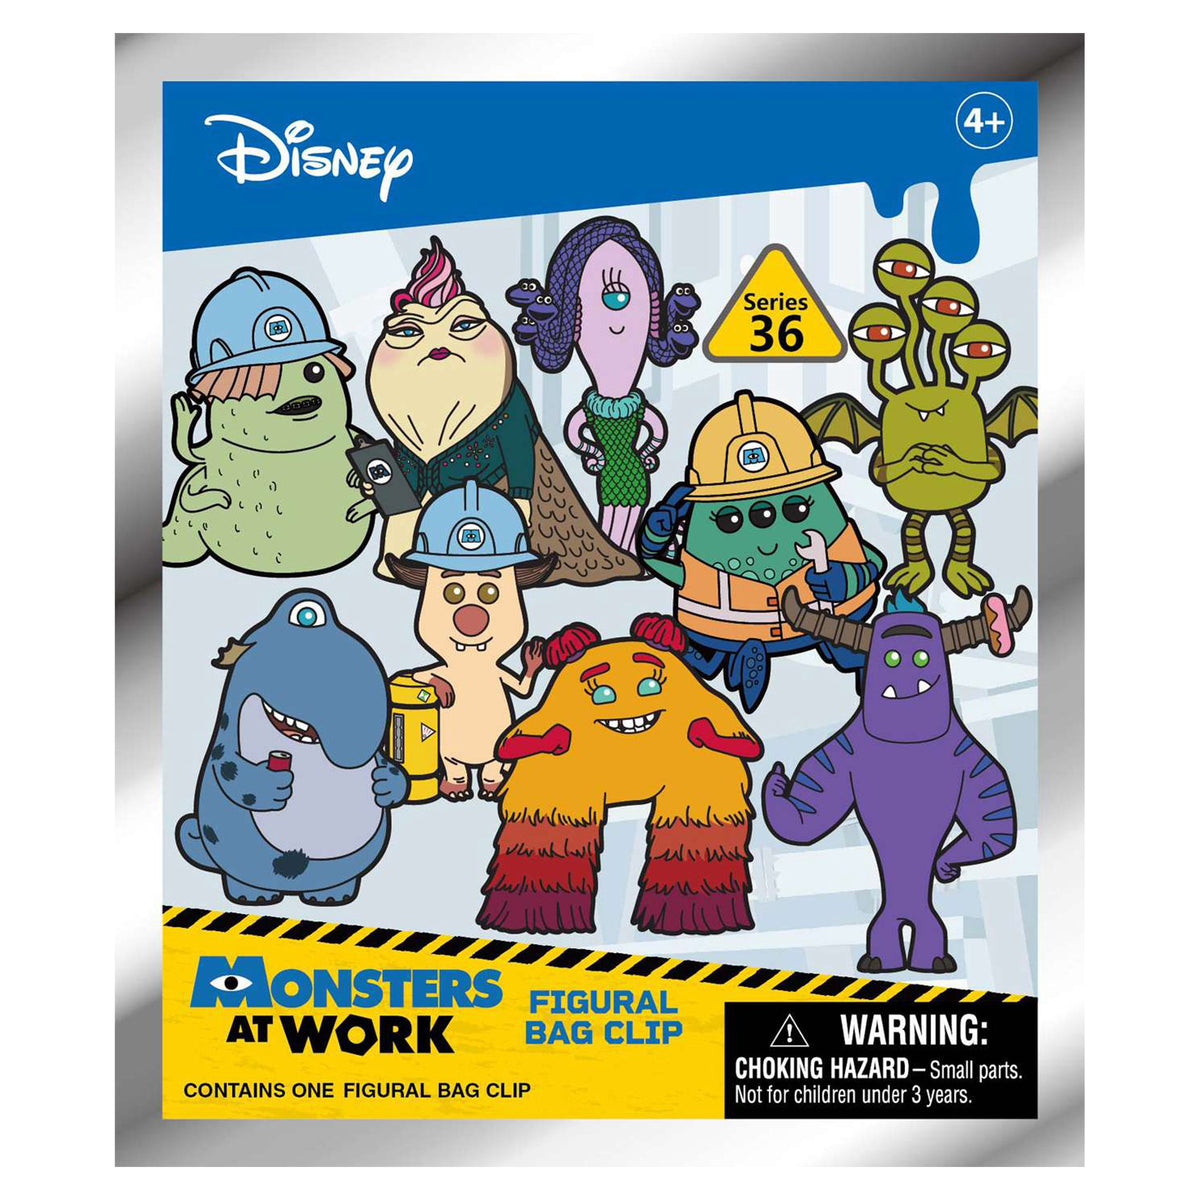 Disney Pixar Monsters at Work Series 36 Collectible 3D Bag Clip - Mystery Bag